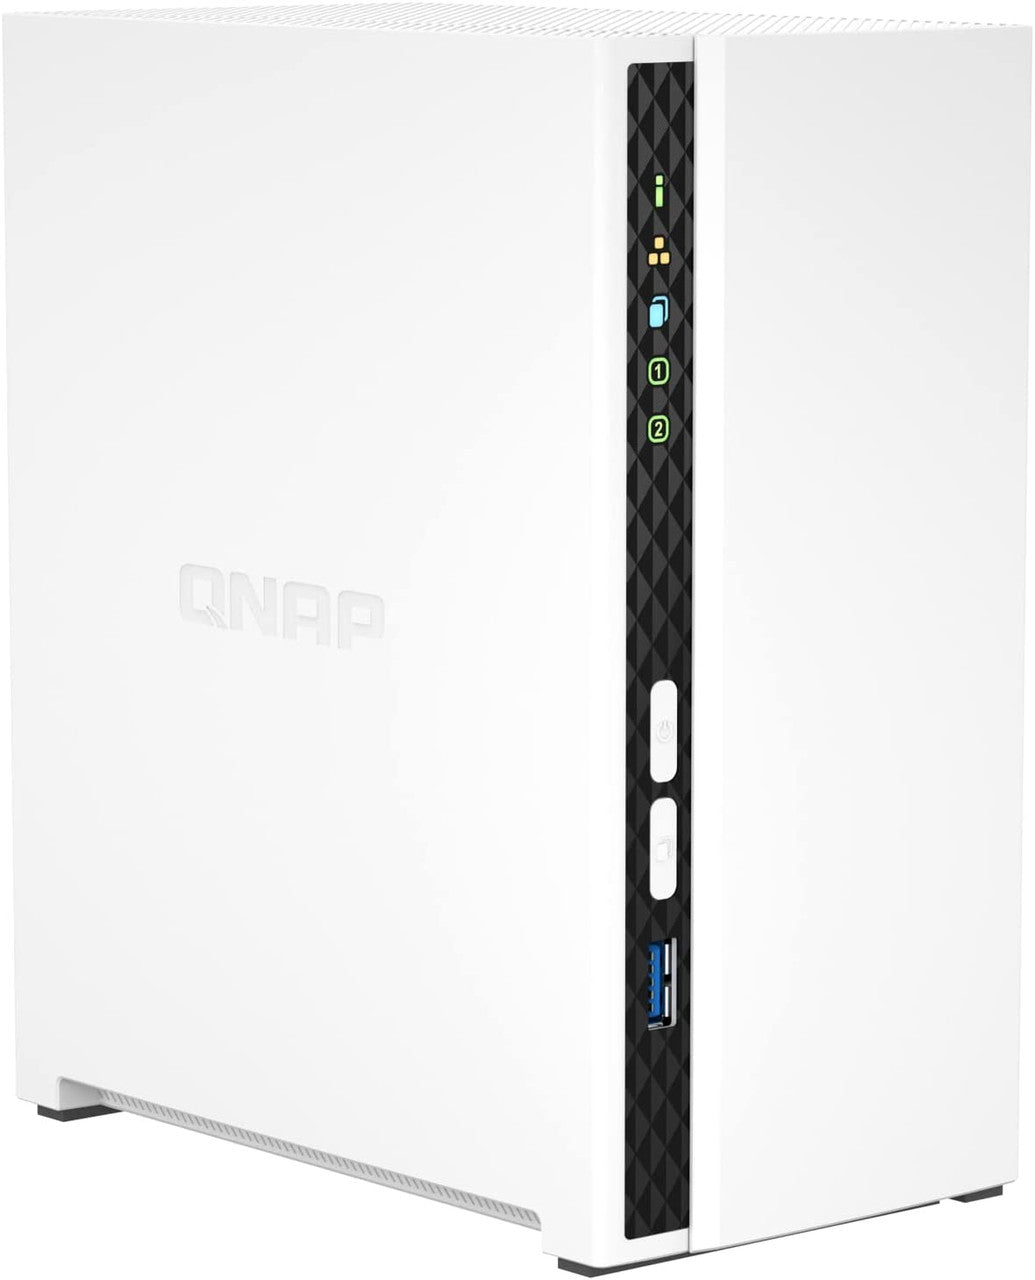 QNAP TS-233 2-Bay Desktop NAS with a 8TB (2 x 4TB) of Western Digital Red Plus Drives Fully Assembled and Tested